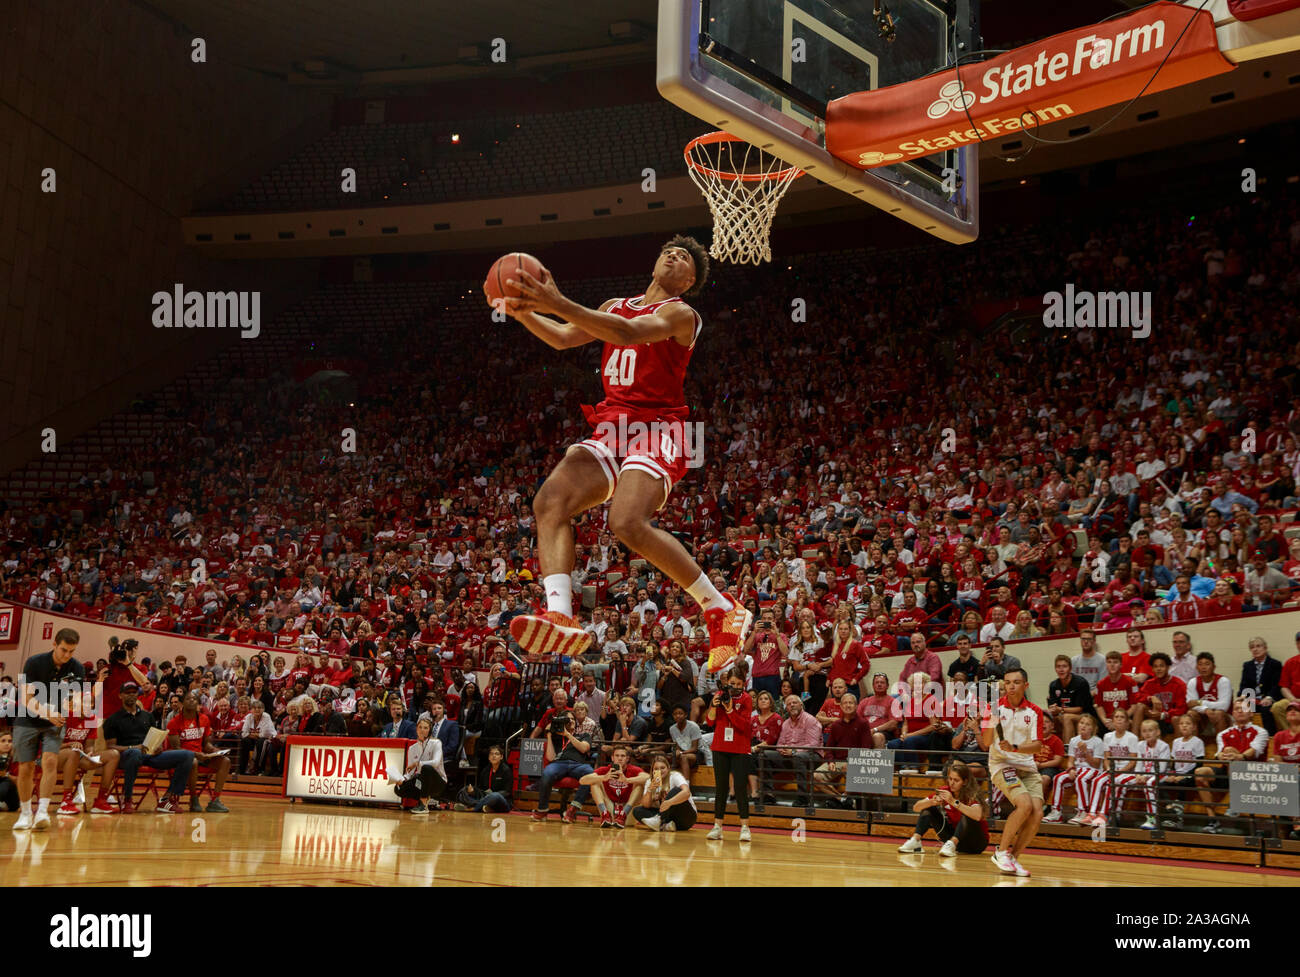 Bloomington, United States. 05th Oct, 2019. Indiana University basketball player, Trayce Jackson-Davis participates in the slam dunk contest while wearing Calbert Cheaney's number 40 in tribute during Hoosier Hysteria. Cheany, a player for the Indiana Hoosiers from 1989-93 under coach Bob Knight, has been inducted into the Indiana Basketballl Hall of Fame.The Hoosier Hysteria event officially kicks off the basketball season at Indiana University whose team has won five national division 1 NCAA basketball titles. Credit: SOPA Images Limited/Alamy Live News Stock Photo